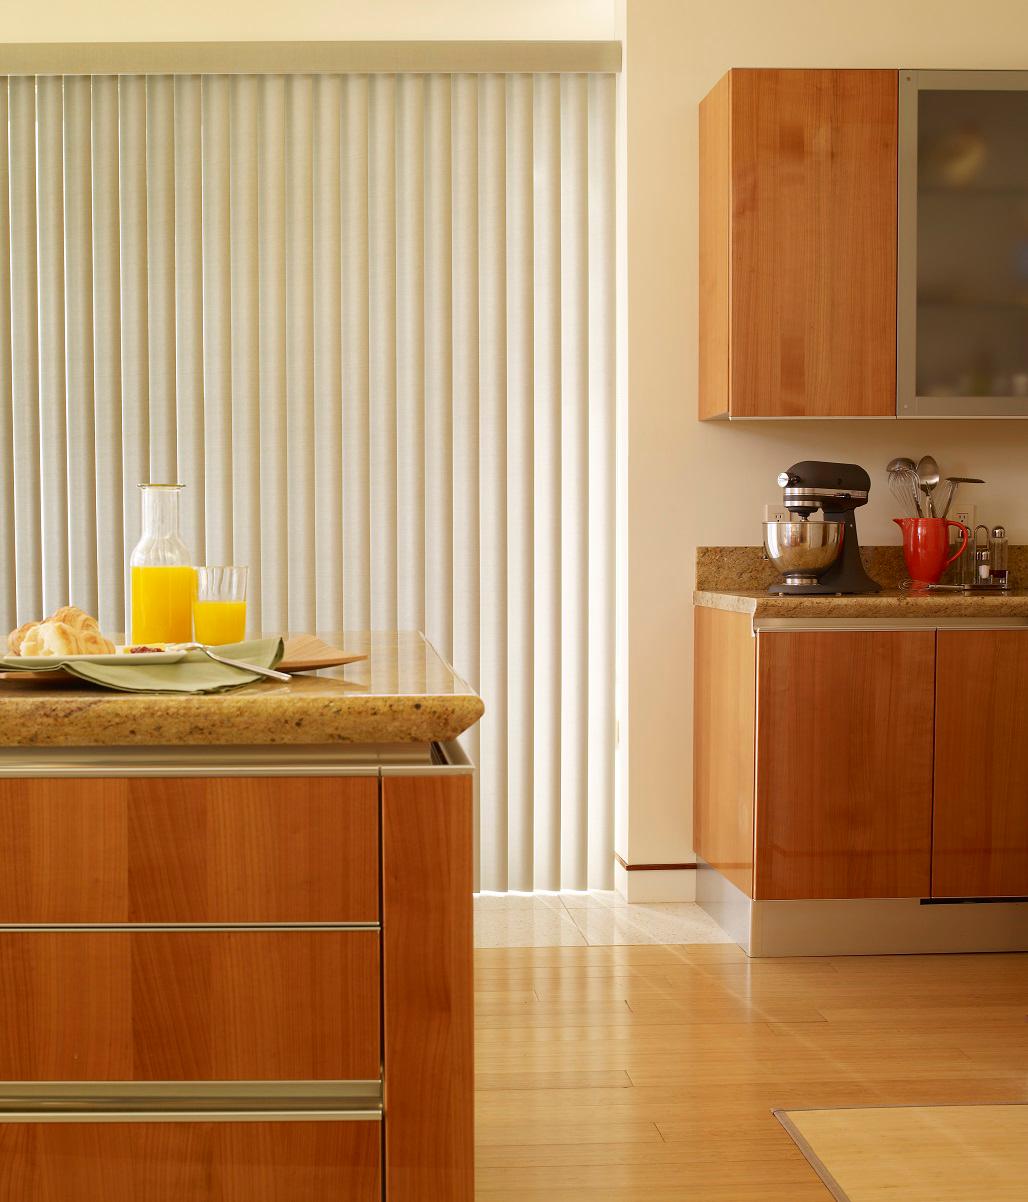 Ready to be enlightened? Then try our Enlightened Vertical Blinds! They’re sleek,  easy to use, perfect for both windows and sliding doors—and they look amazing in this kitchen. #BudgetBlindsGlendaleNorthHollywood  #VerticalBlinds #FreeConsultation #WindowWednesday